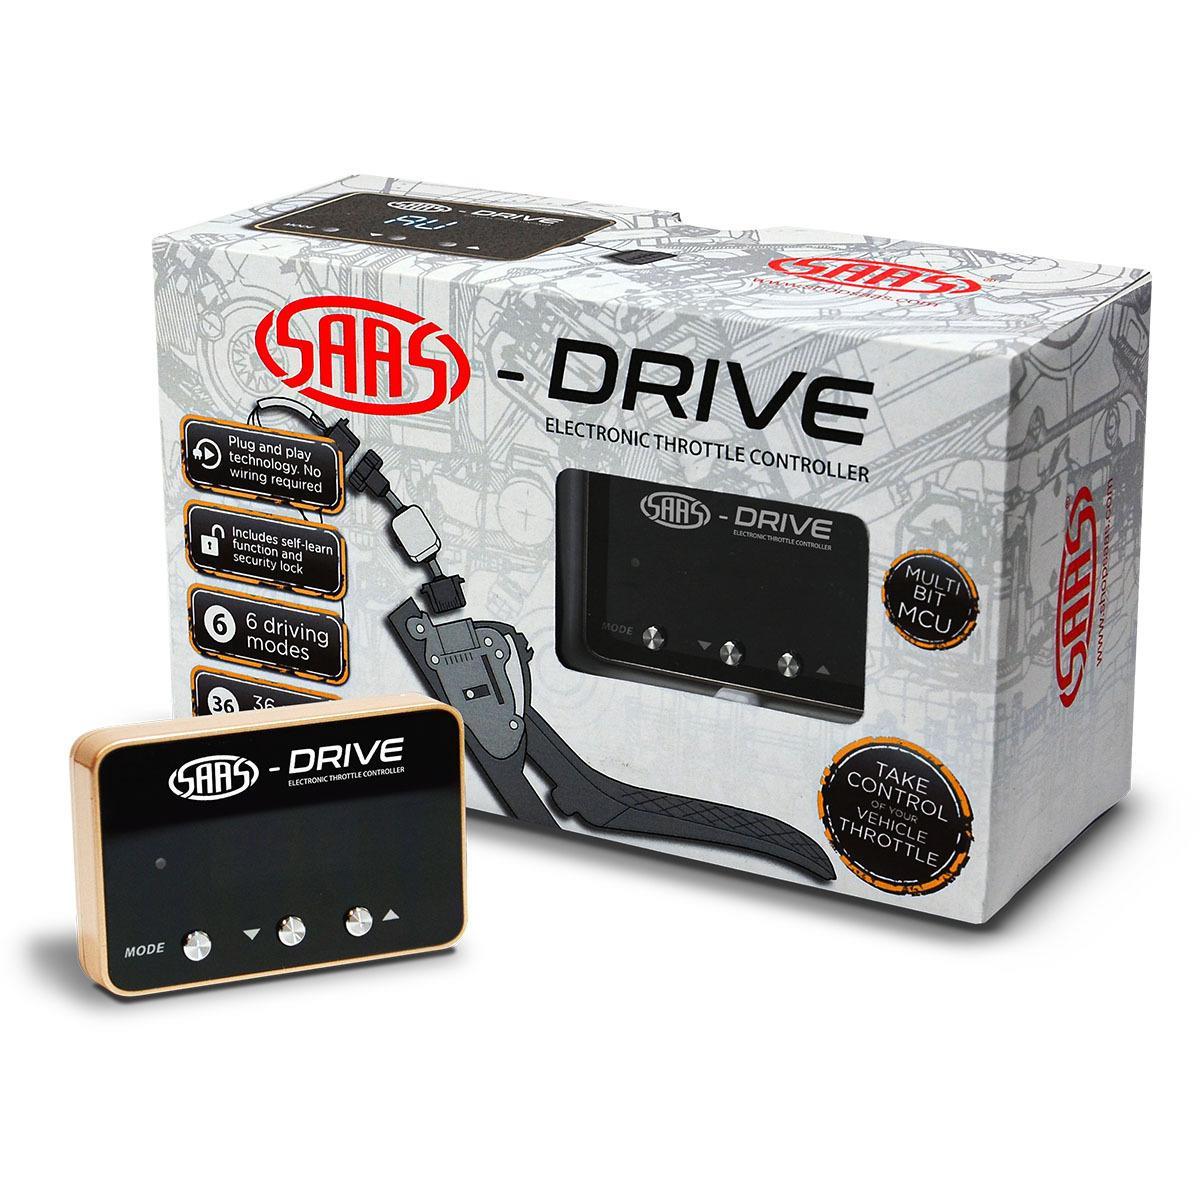 SAAS-Drive Throttle Controller For Audi A3 Typ 8P/8V 2004 >